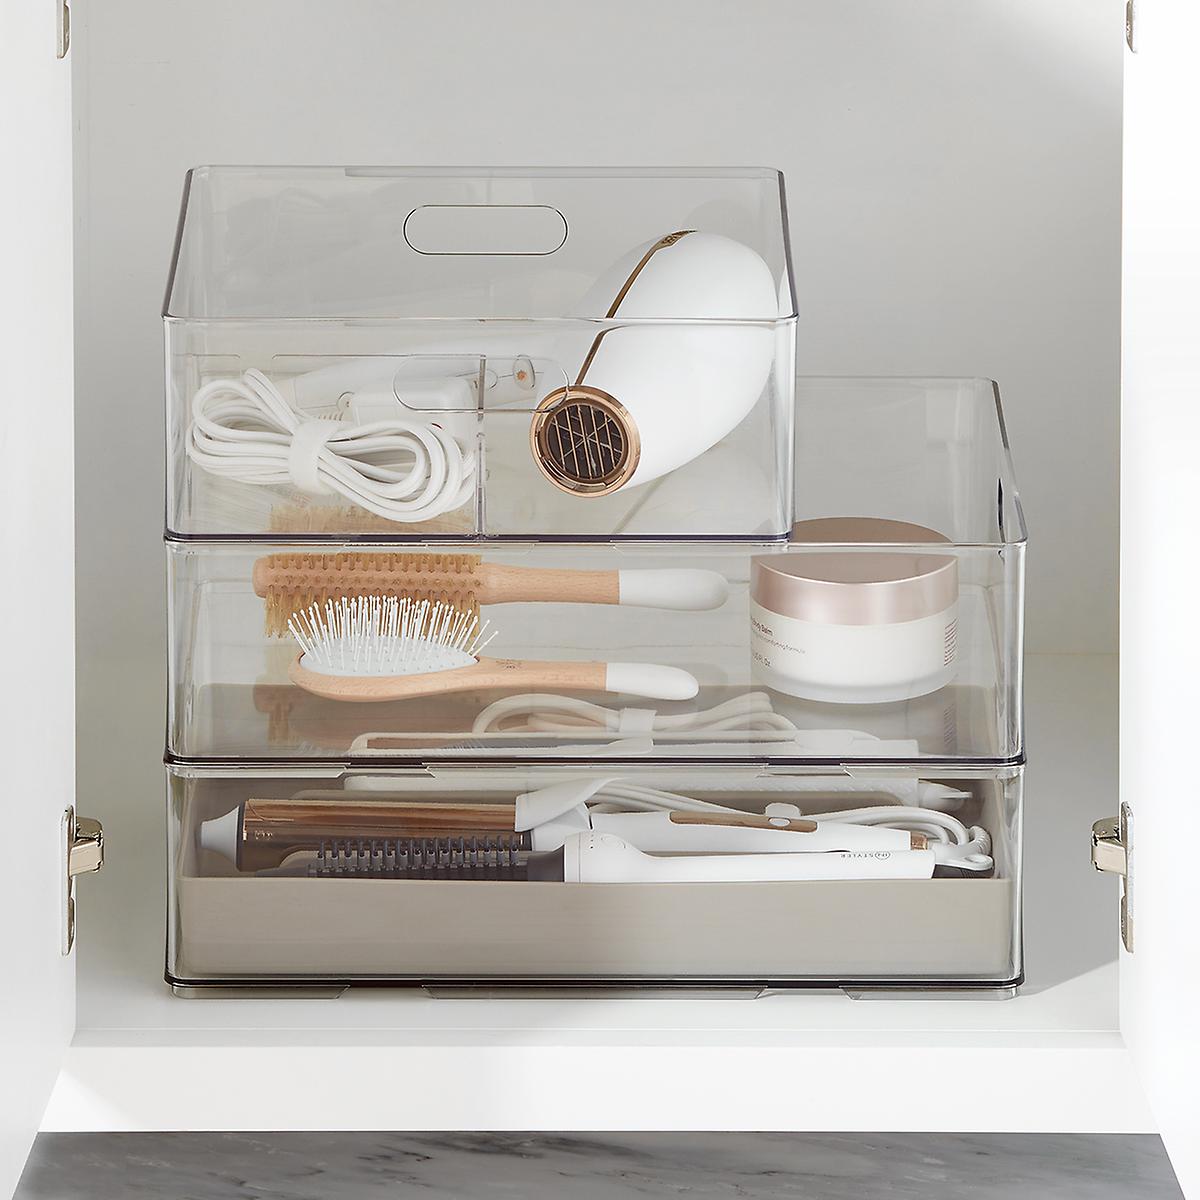 THE Hair Tool Trio with Heat-Resistant Tray Solution